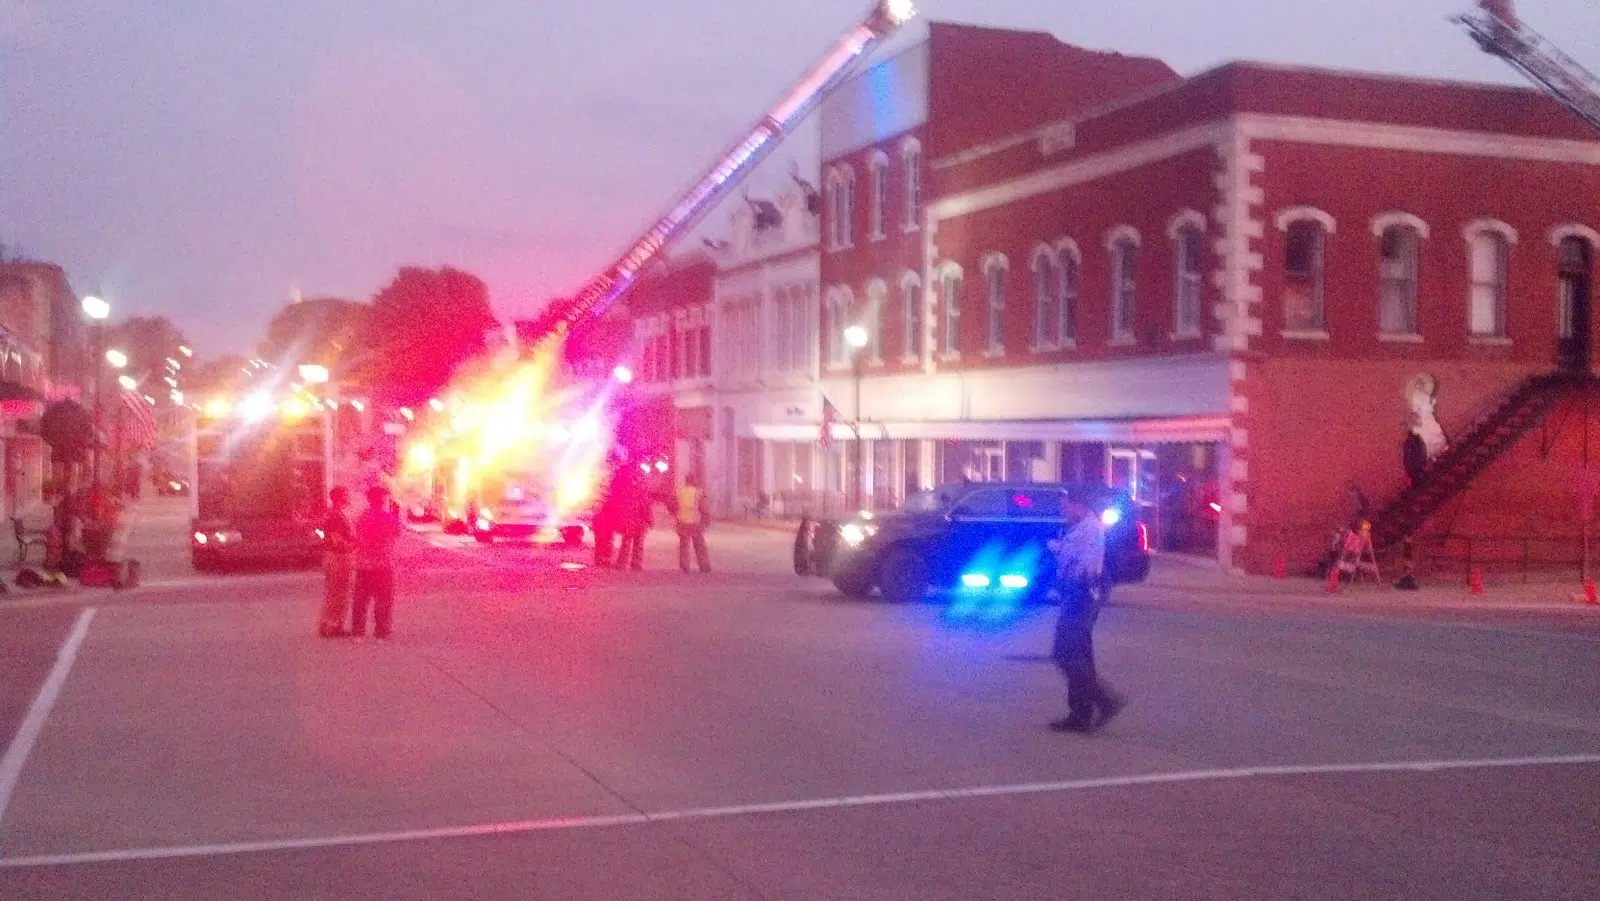 Emergency crews in downtown Vandalia this morning for apparent building collapse